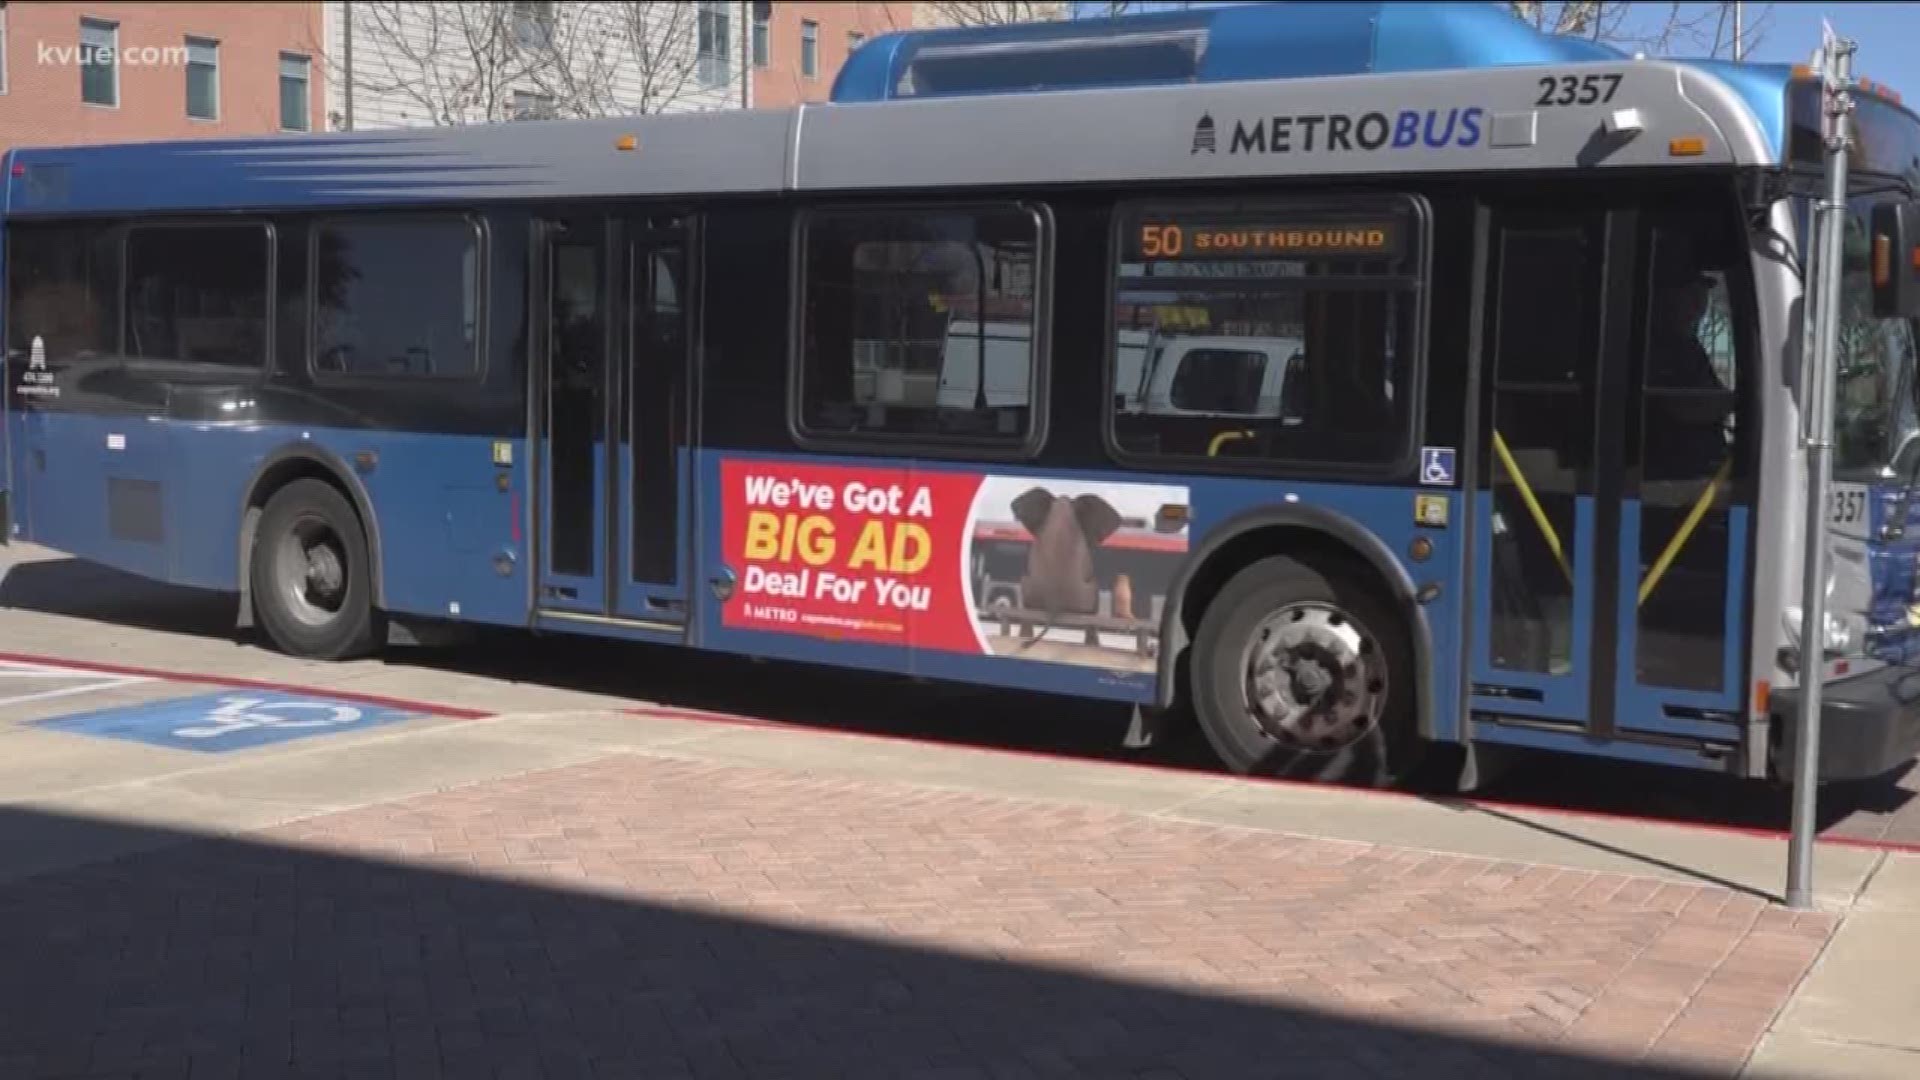 CapMetro and the City of Round Rock say recent changes to their bus service are making a difference.